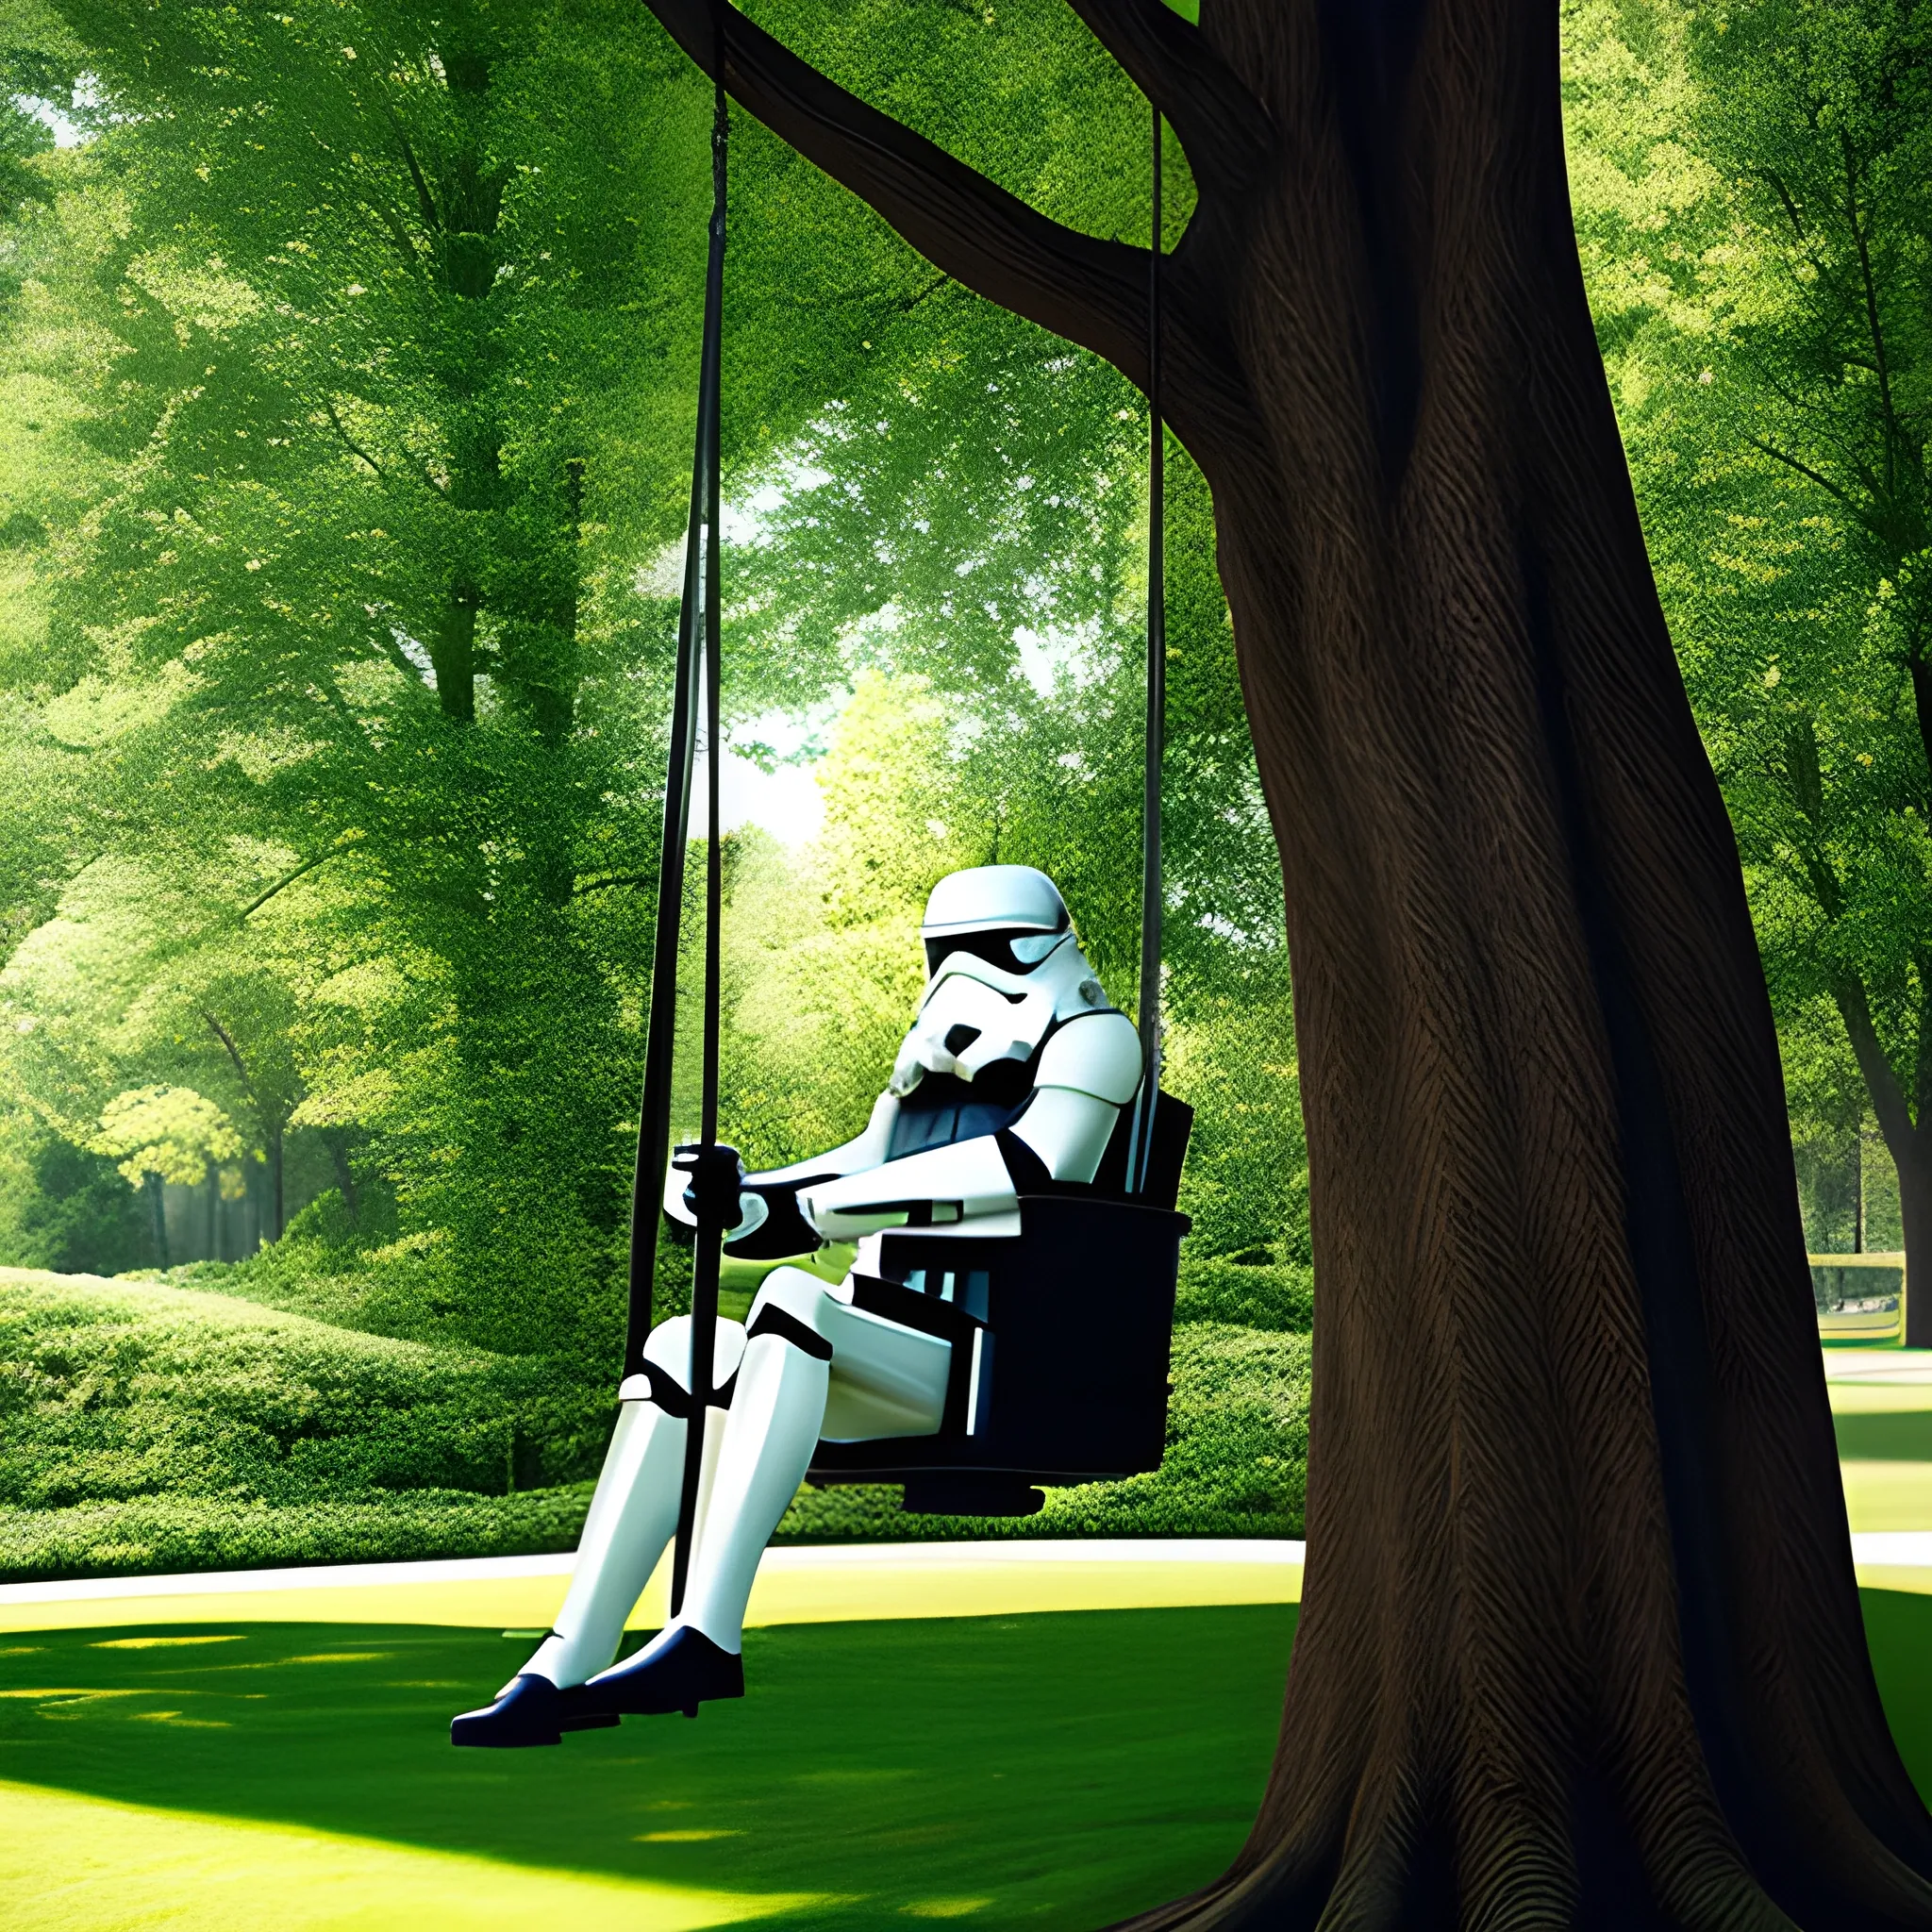 stormtrooper enjoys a swing in a child’s playground from Star Wars movie side view